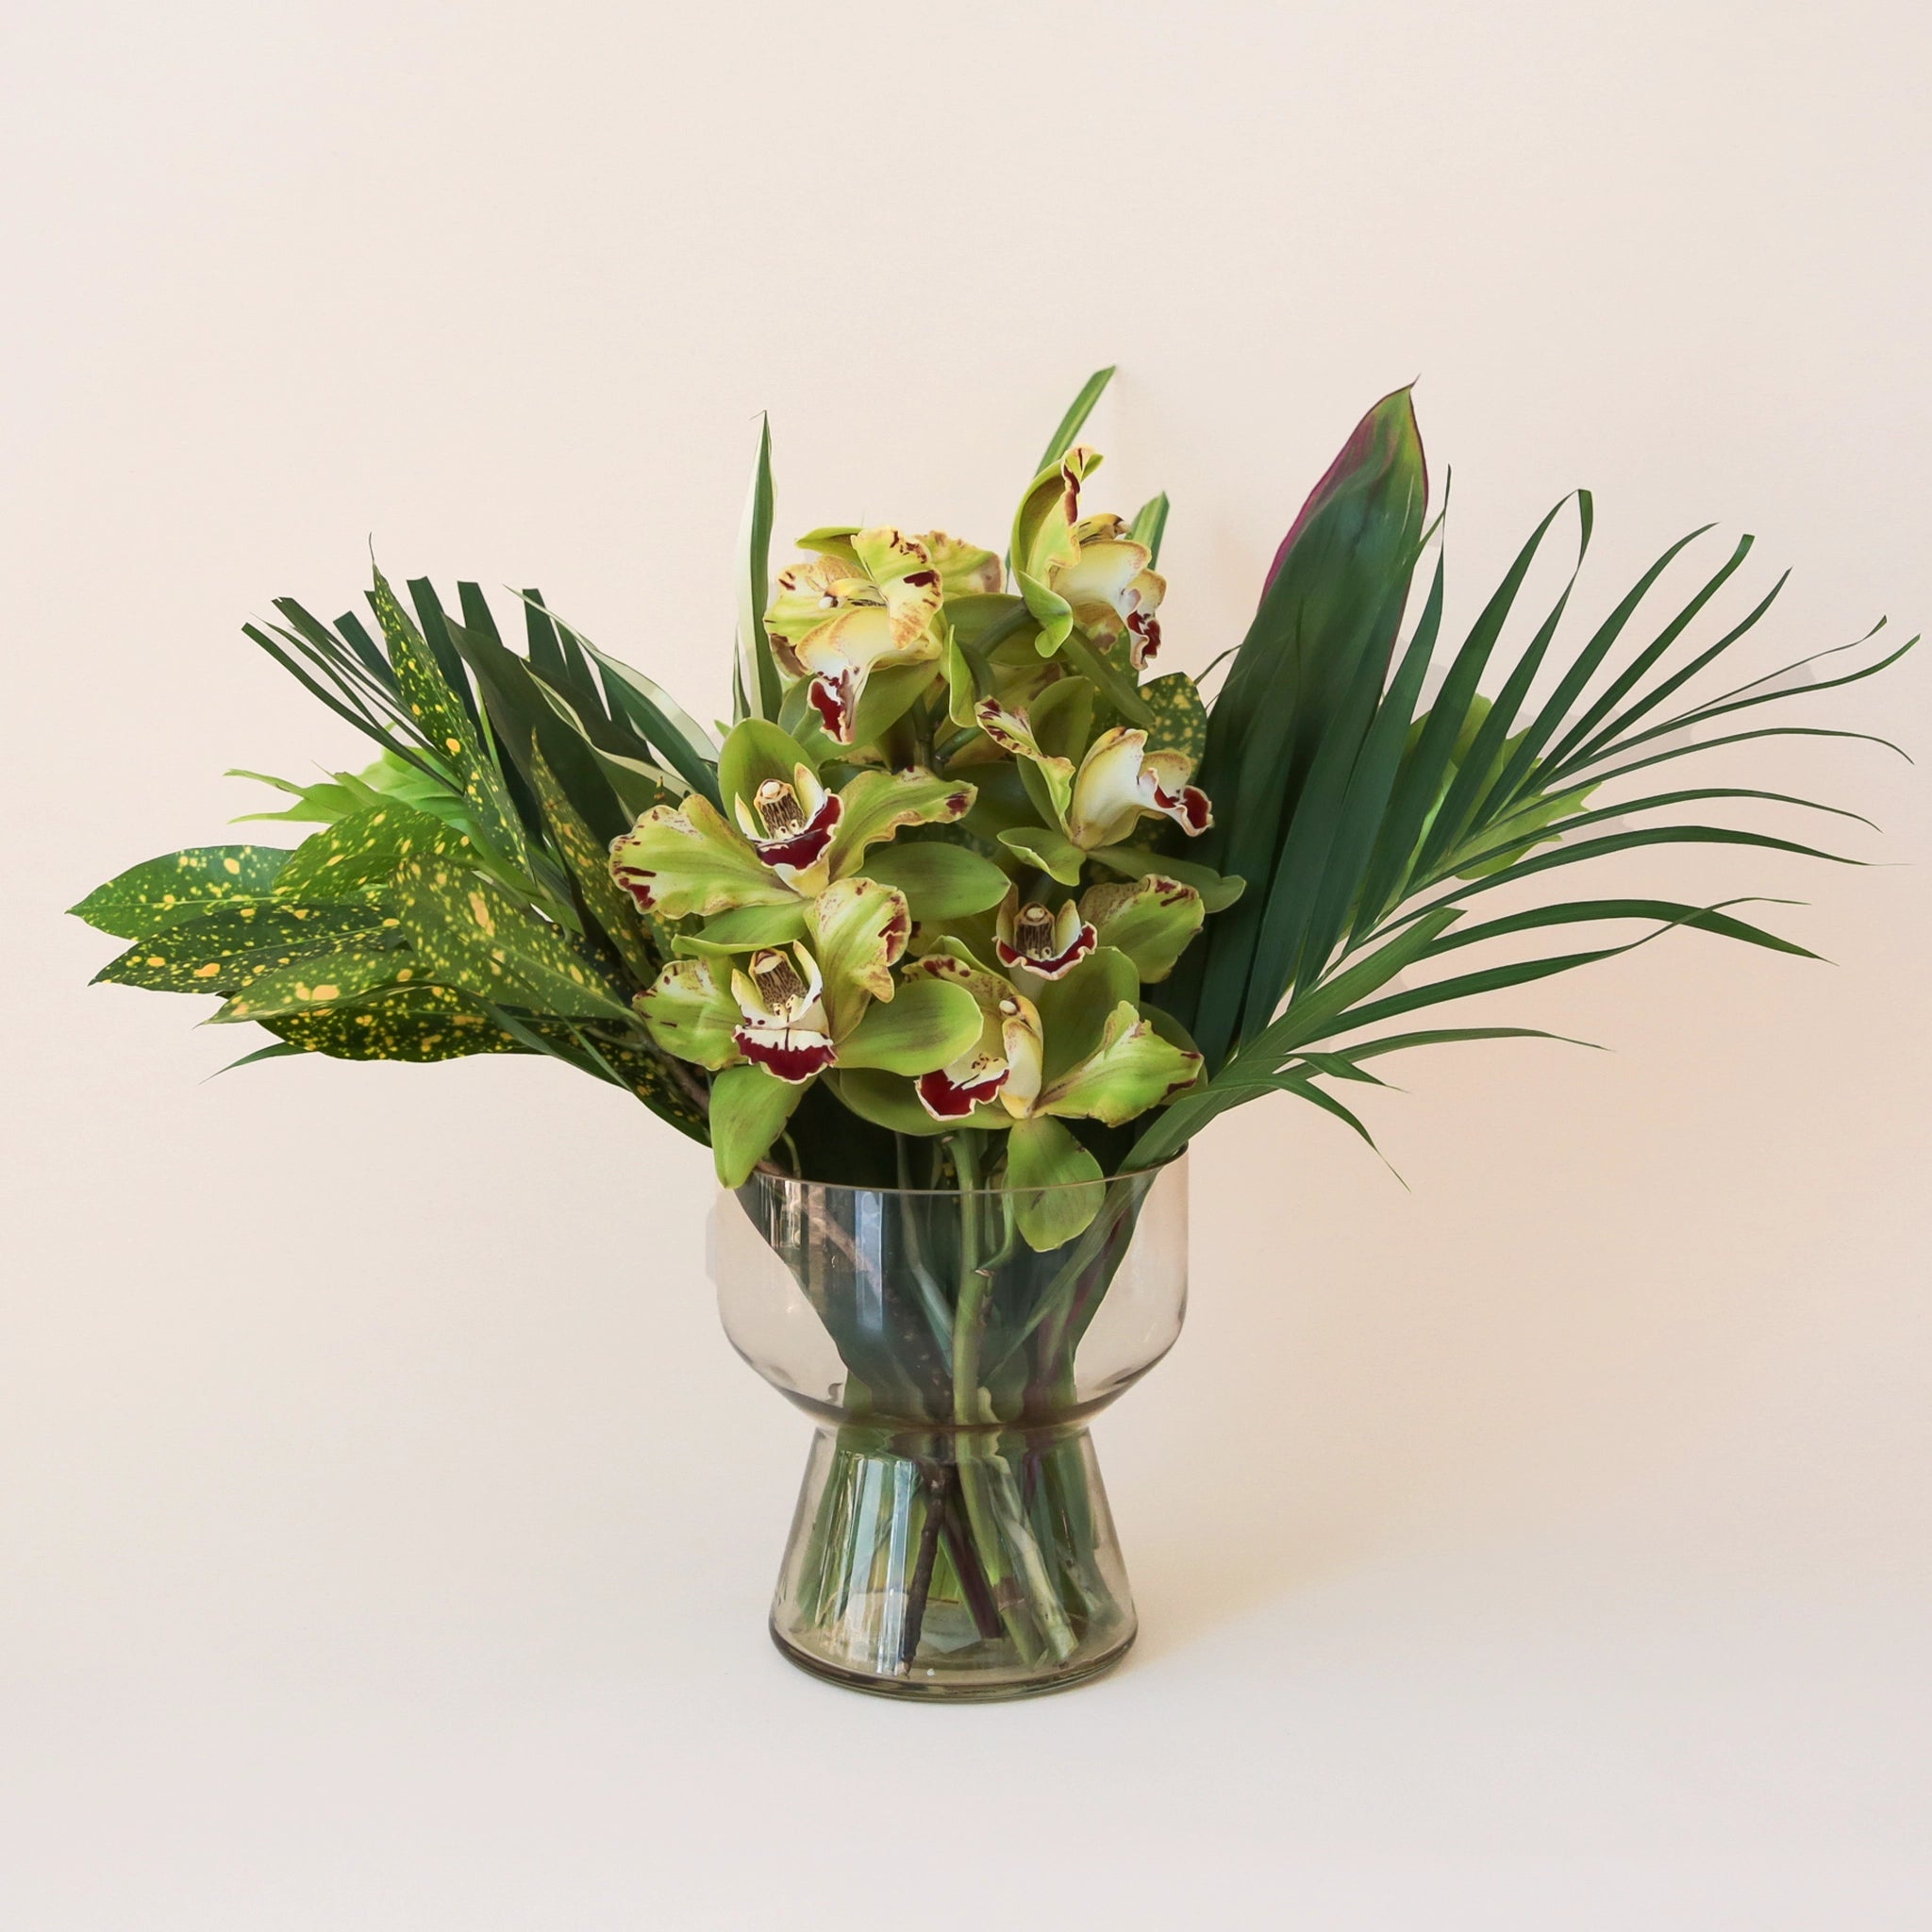 On a cream background is a light green glass vase with a green tropical flower arrangement inside that is sold separately. 